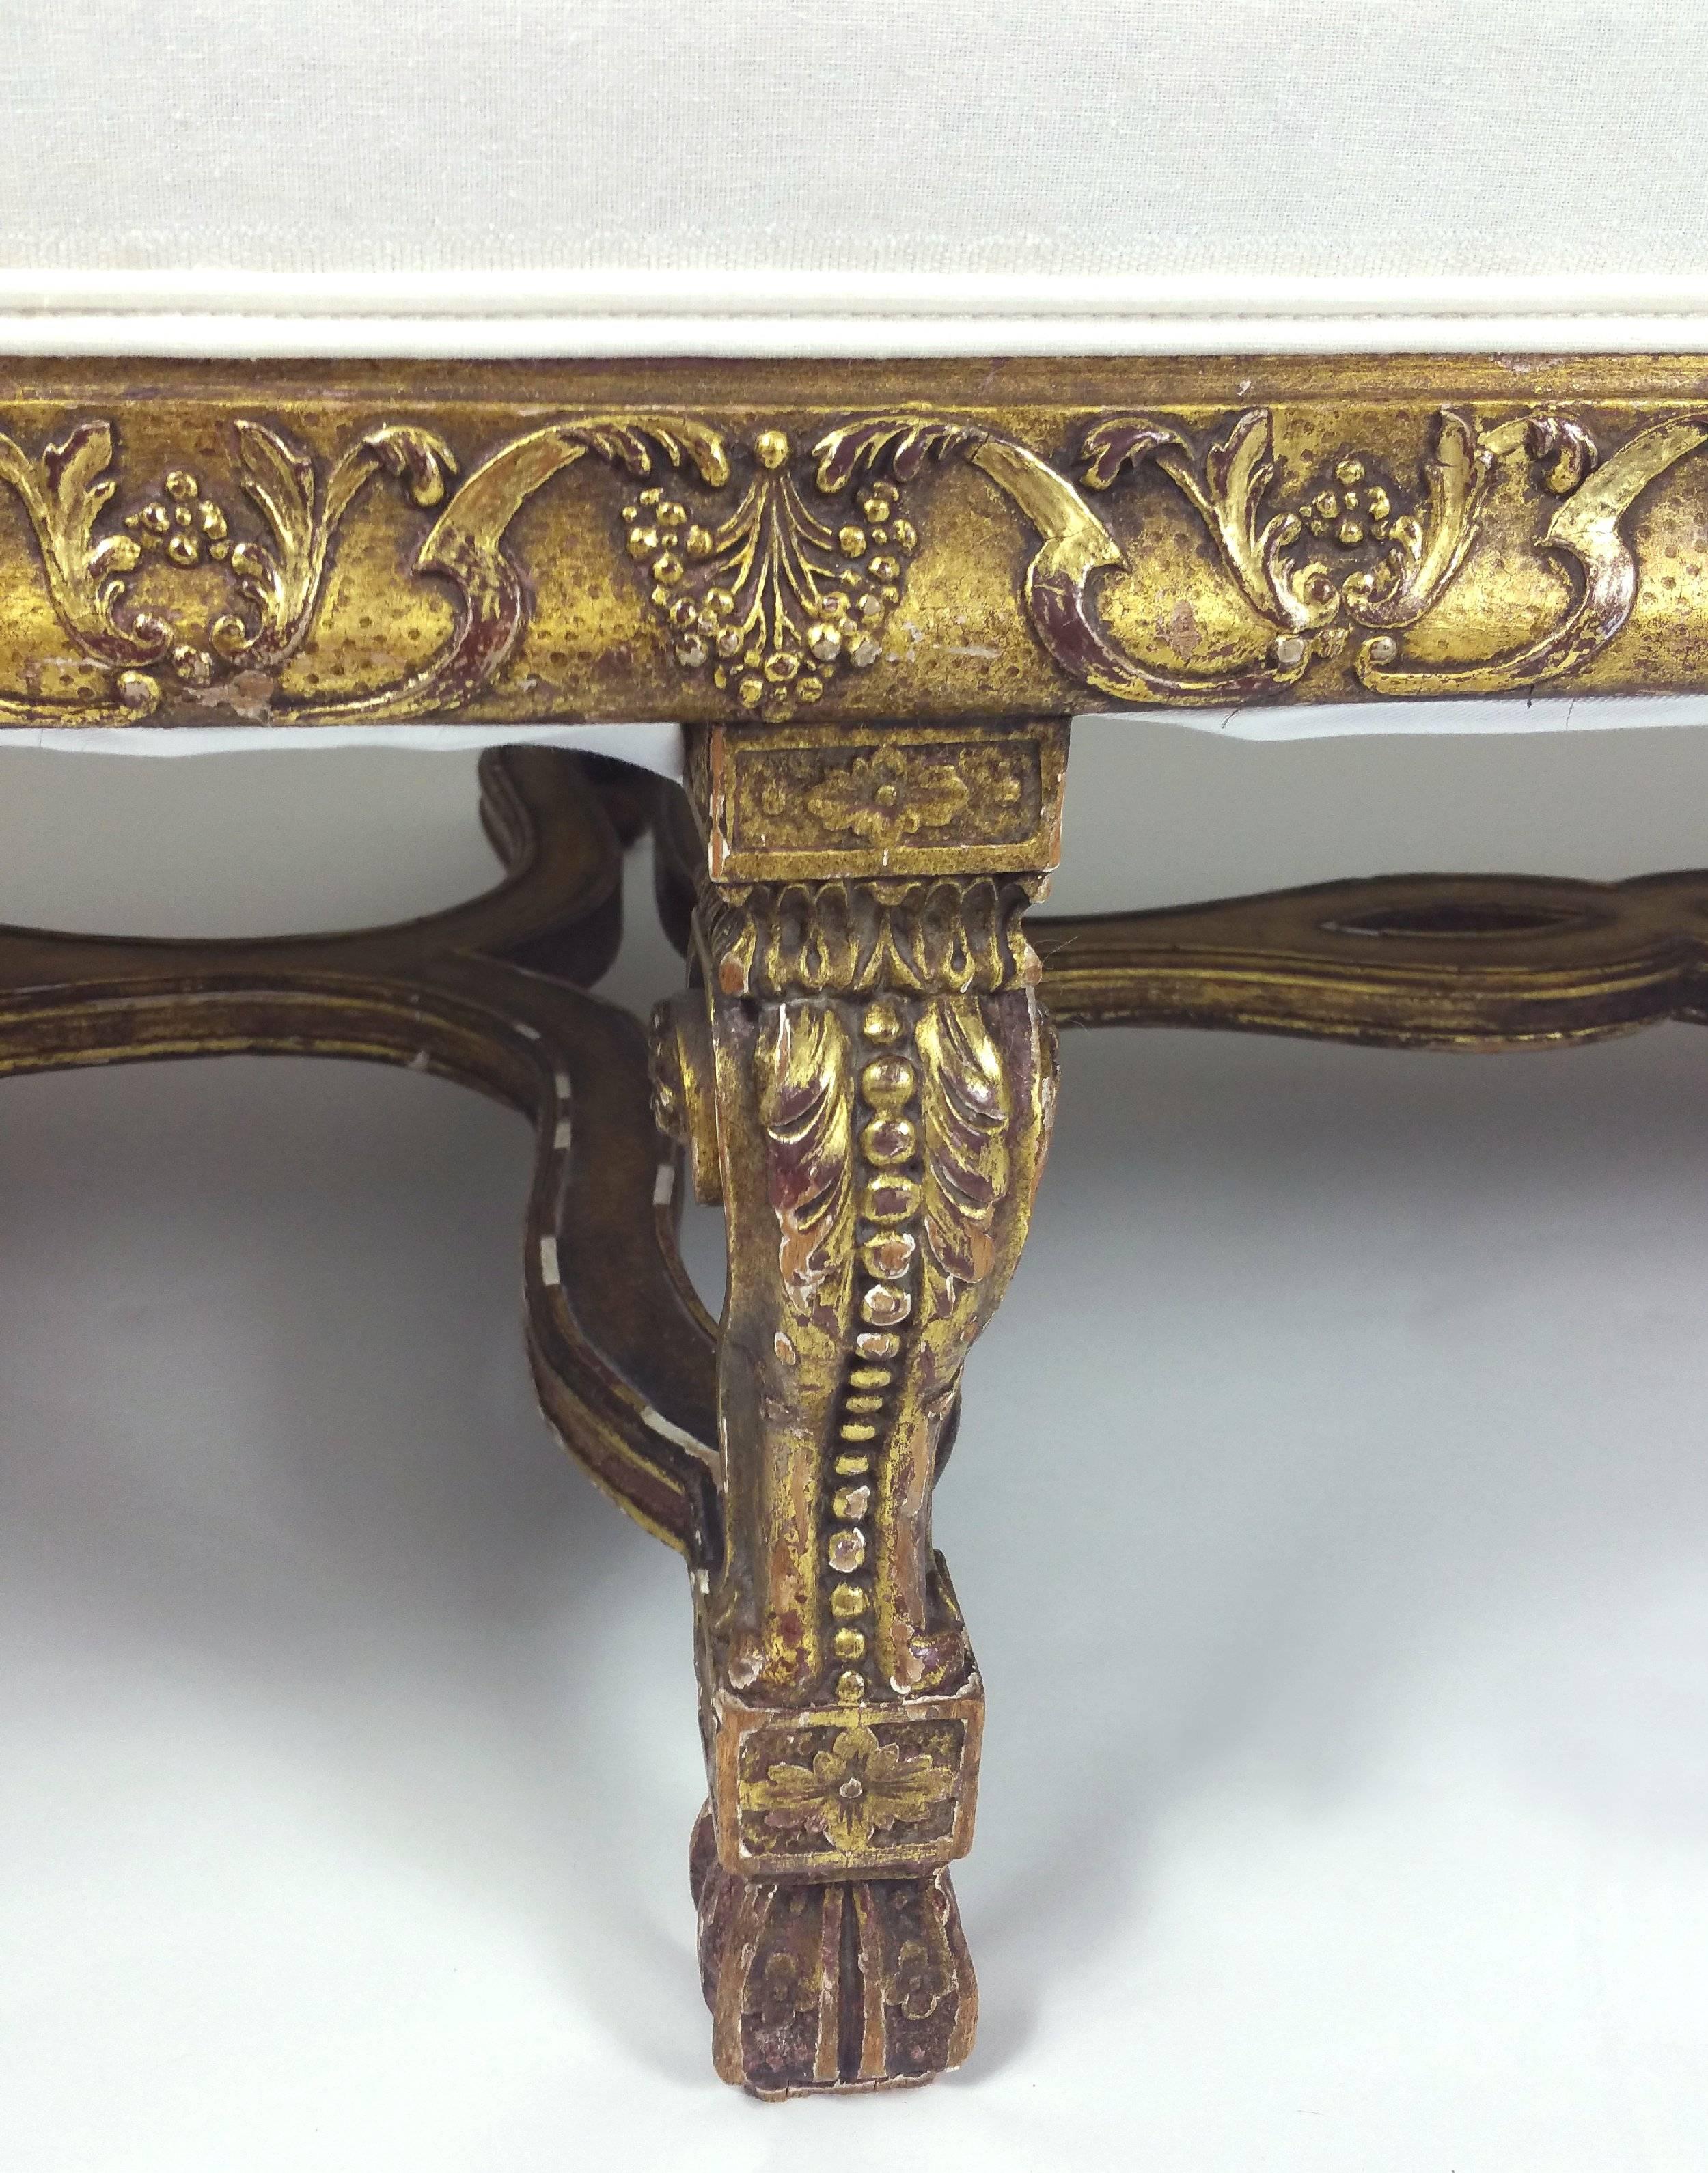 This superb and impressively sizes William and Mary styled carved giltwood settee features exaggerated, scrolled armrest ends and a pierced, shaped under tier. The detailed carving on the base of the seat runs around the entire settee including the